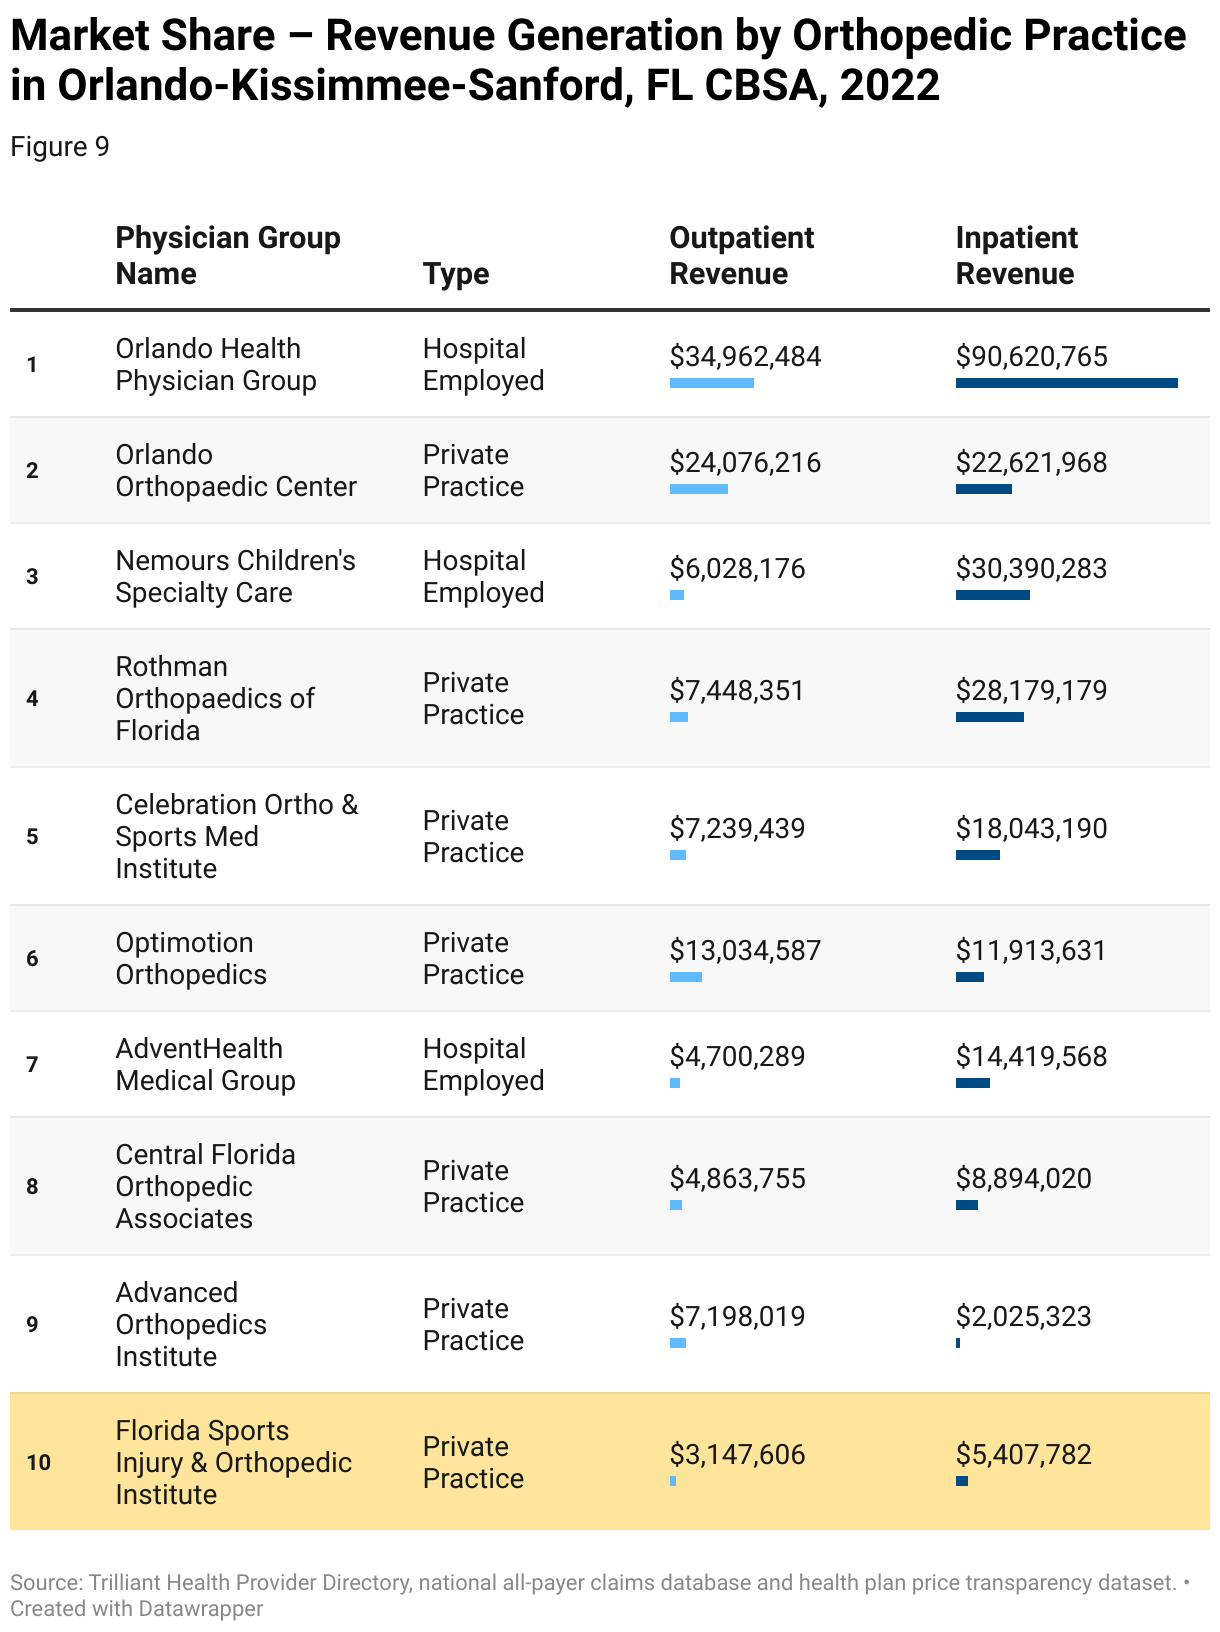 A table that shows the name, affiliation, outpatient revenue and inpatient revenue for 10 orthopedic practices in Orlando, FL